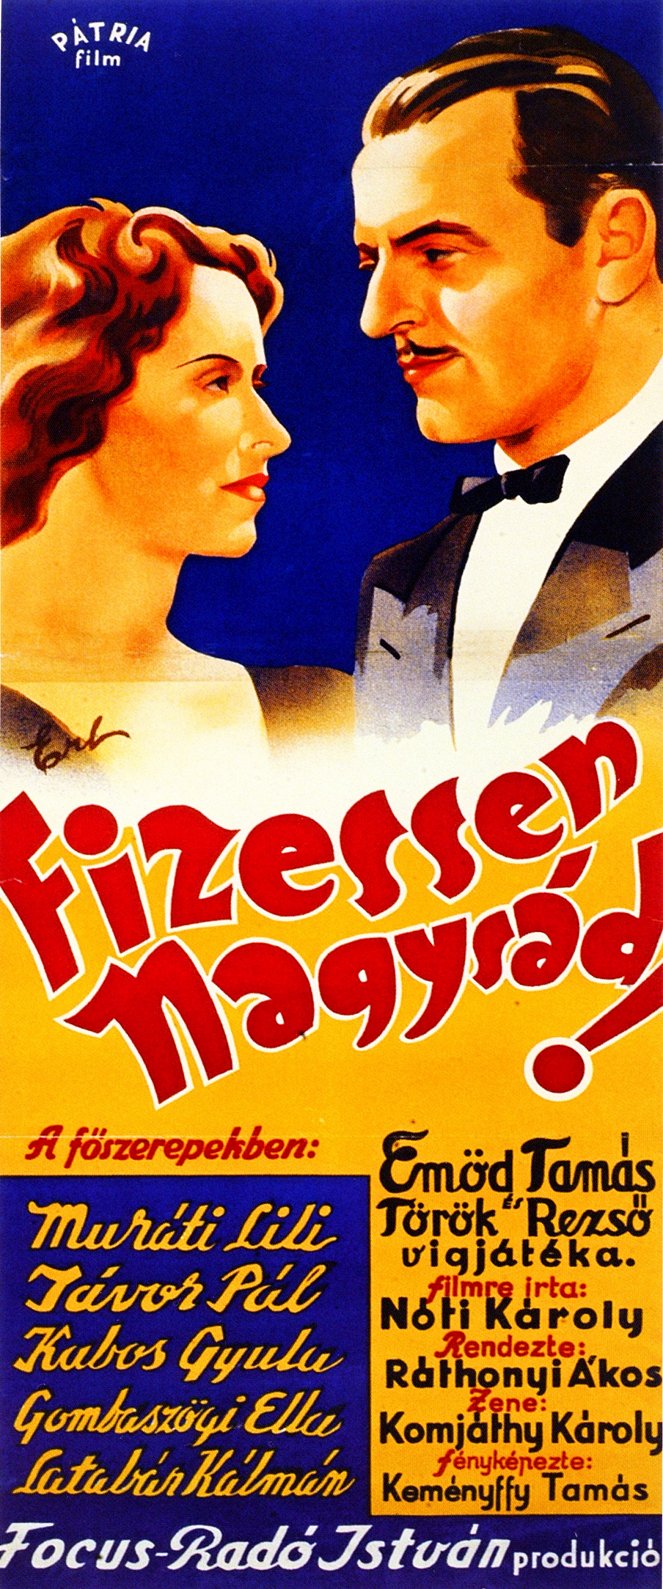 Fizessen, nagysád! - Affiches